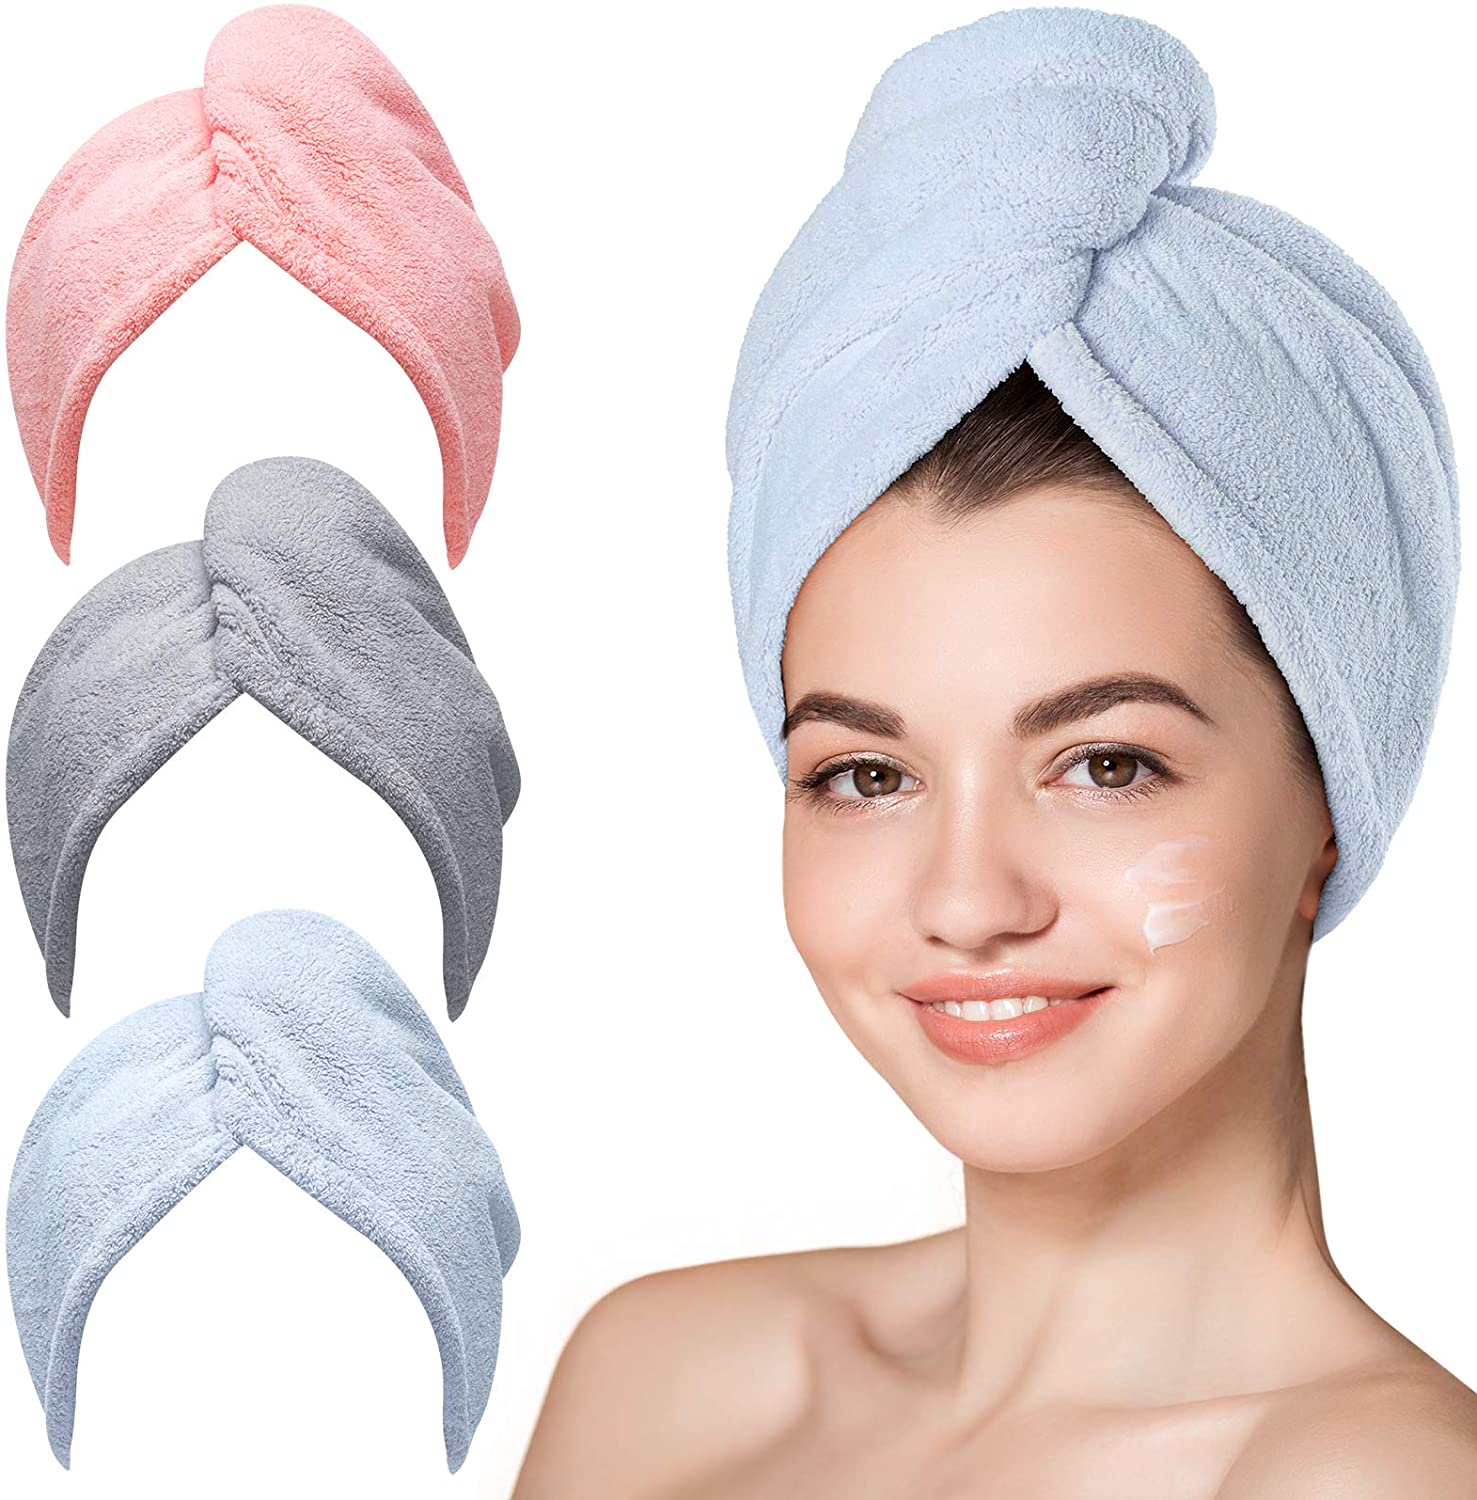 Microfiber Anti-Frizz Drying Wrap Towels, 3 Pack